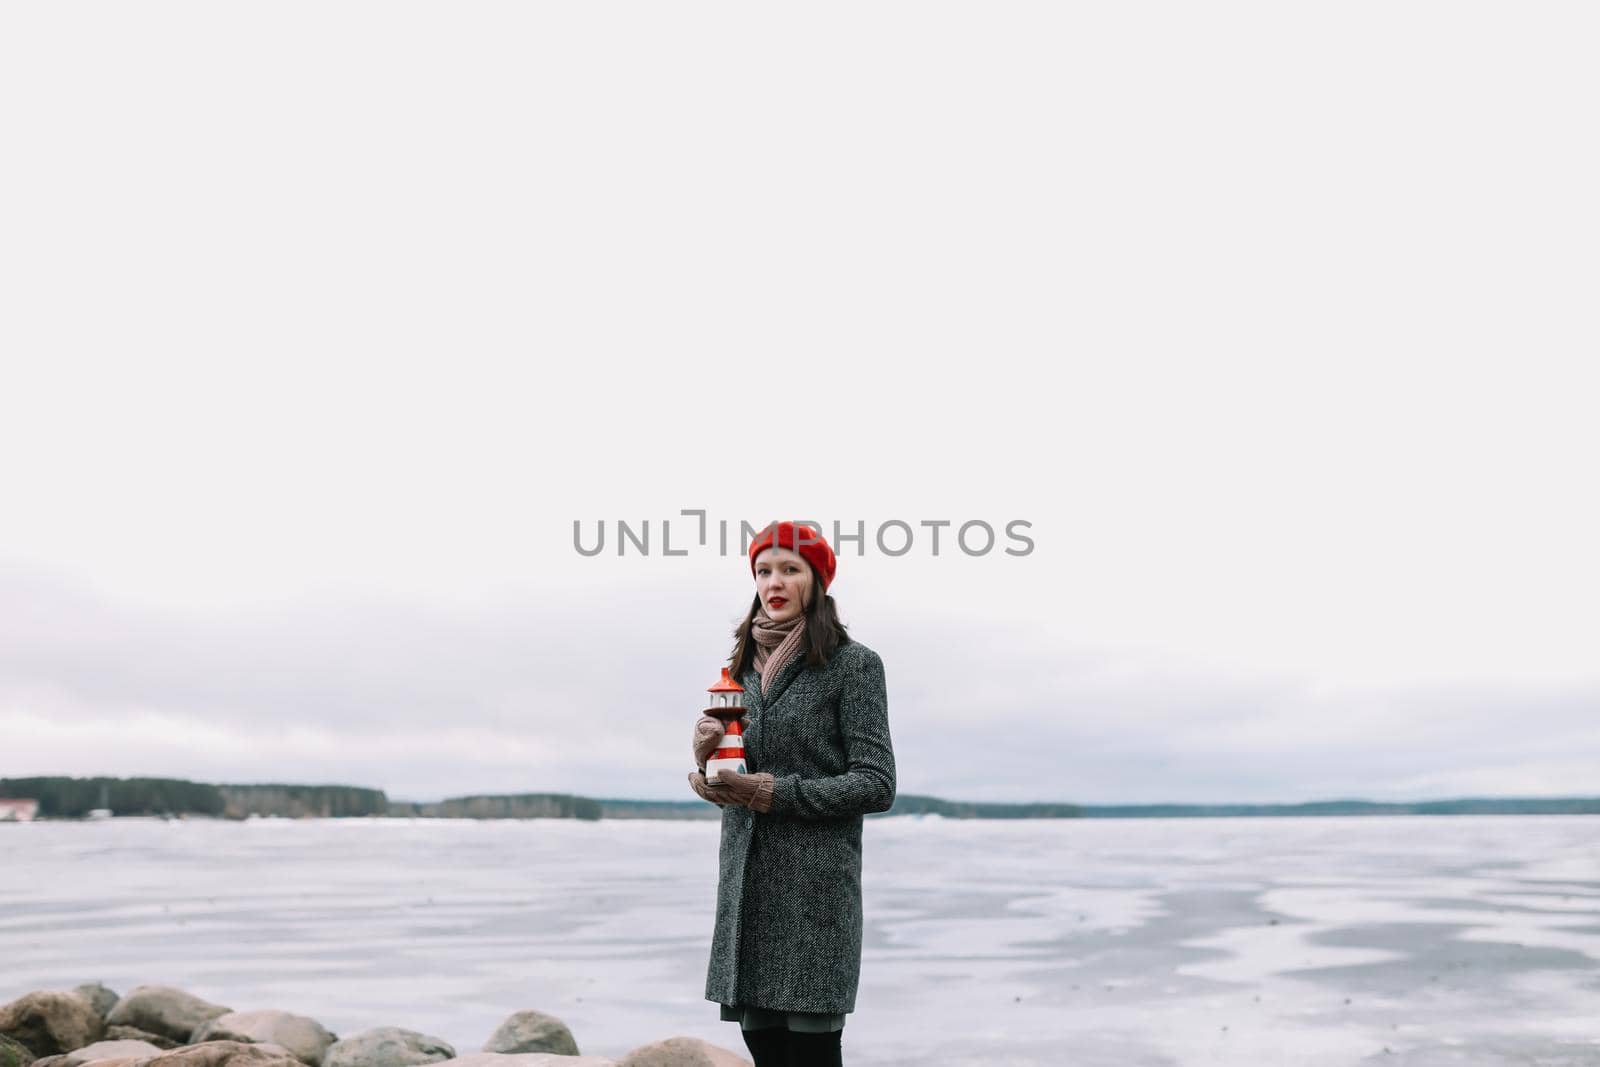 Winter portrait of young woman in a coat and red hat holding decorative lighthouse and standing at the shore of frozen sea. winter, travel, sea background. windy weather, amazing ice seaside